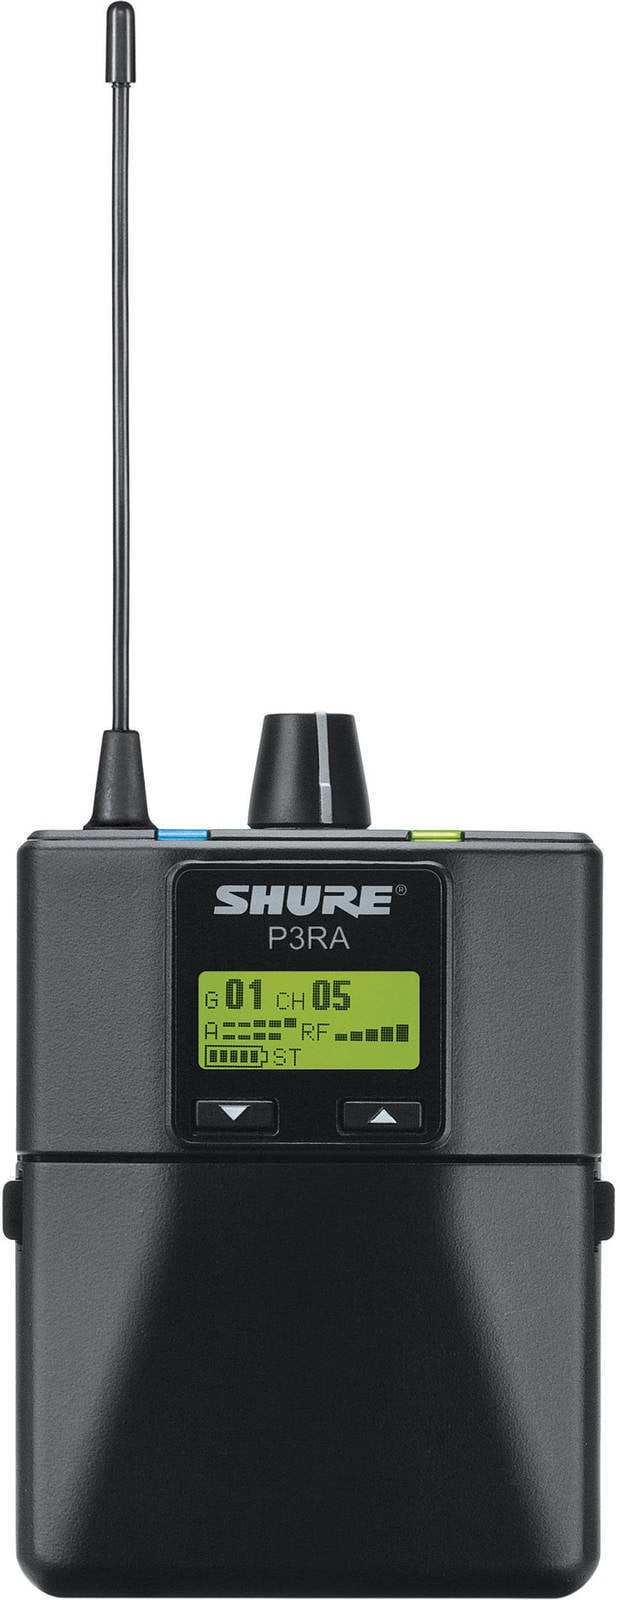 Komponent pro in ear systémy Shure P3RA-H20 - PSM 300 Bodypack Receiver H20: 518–542 MHz